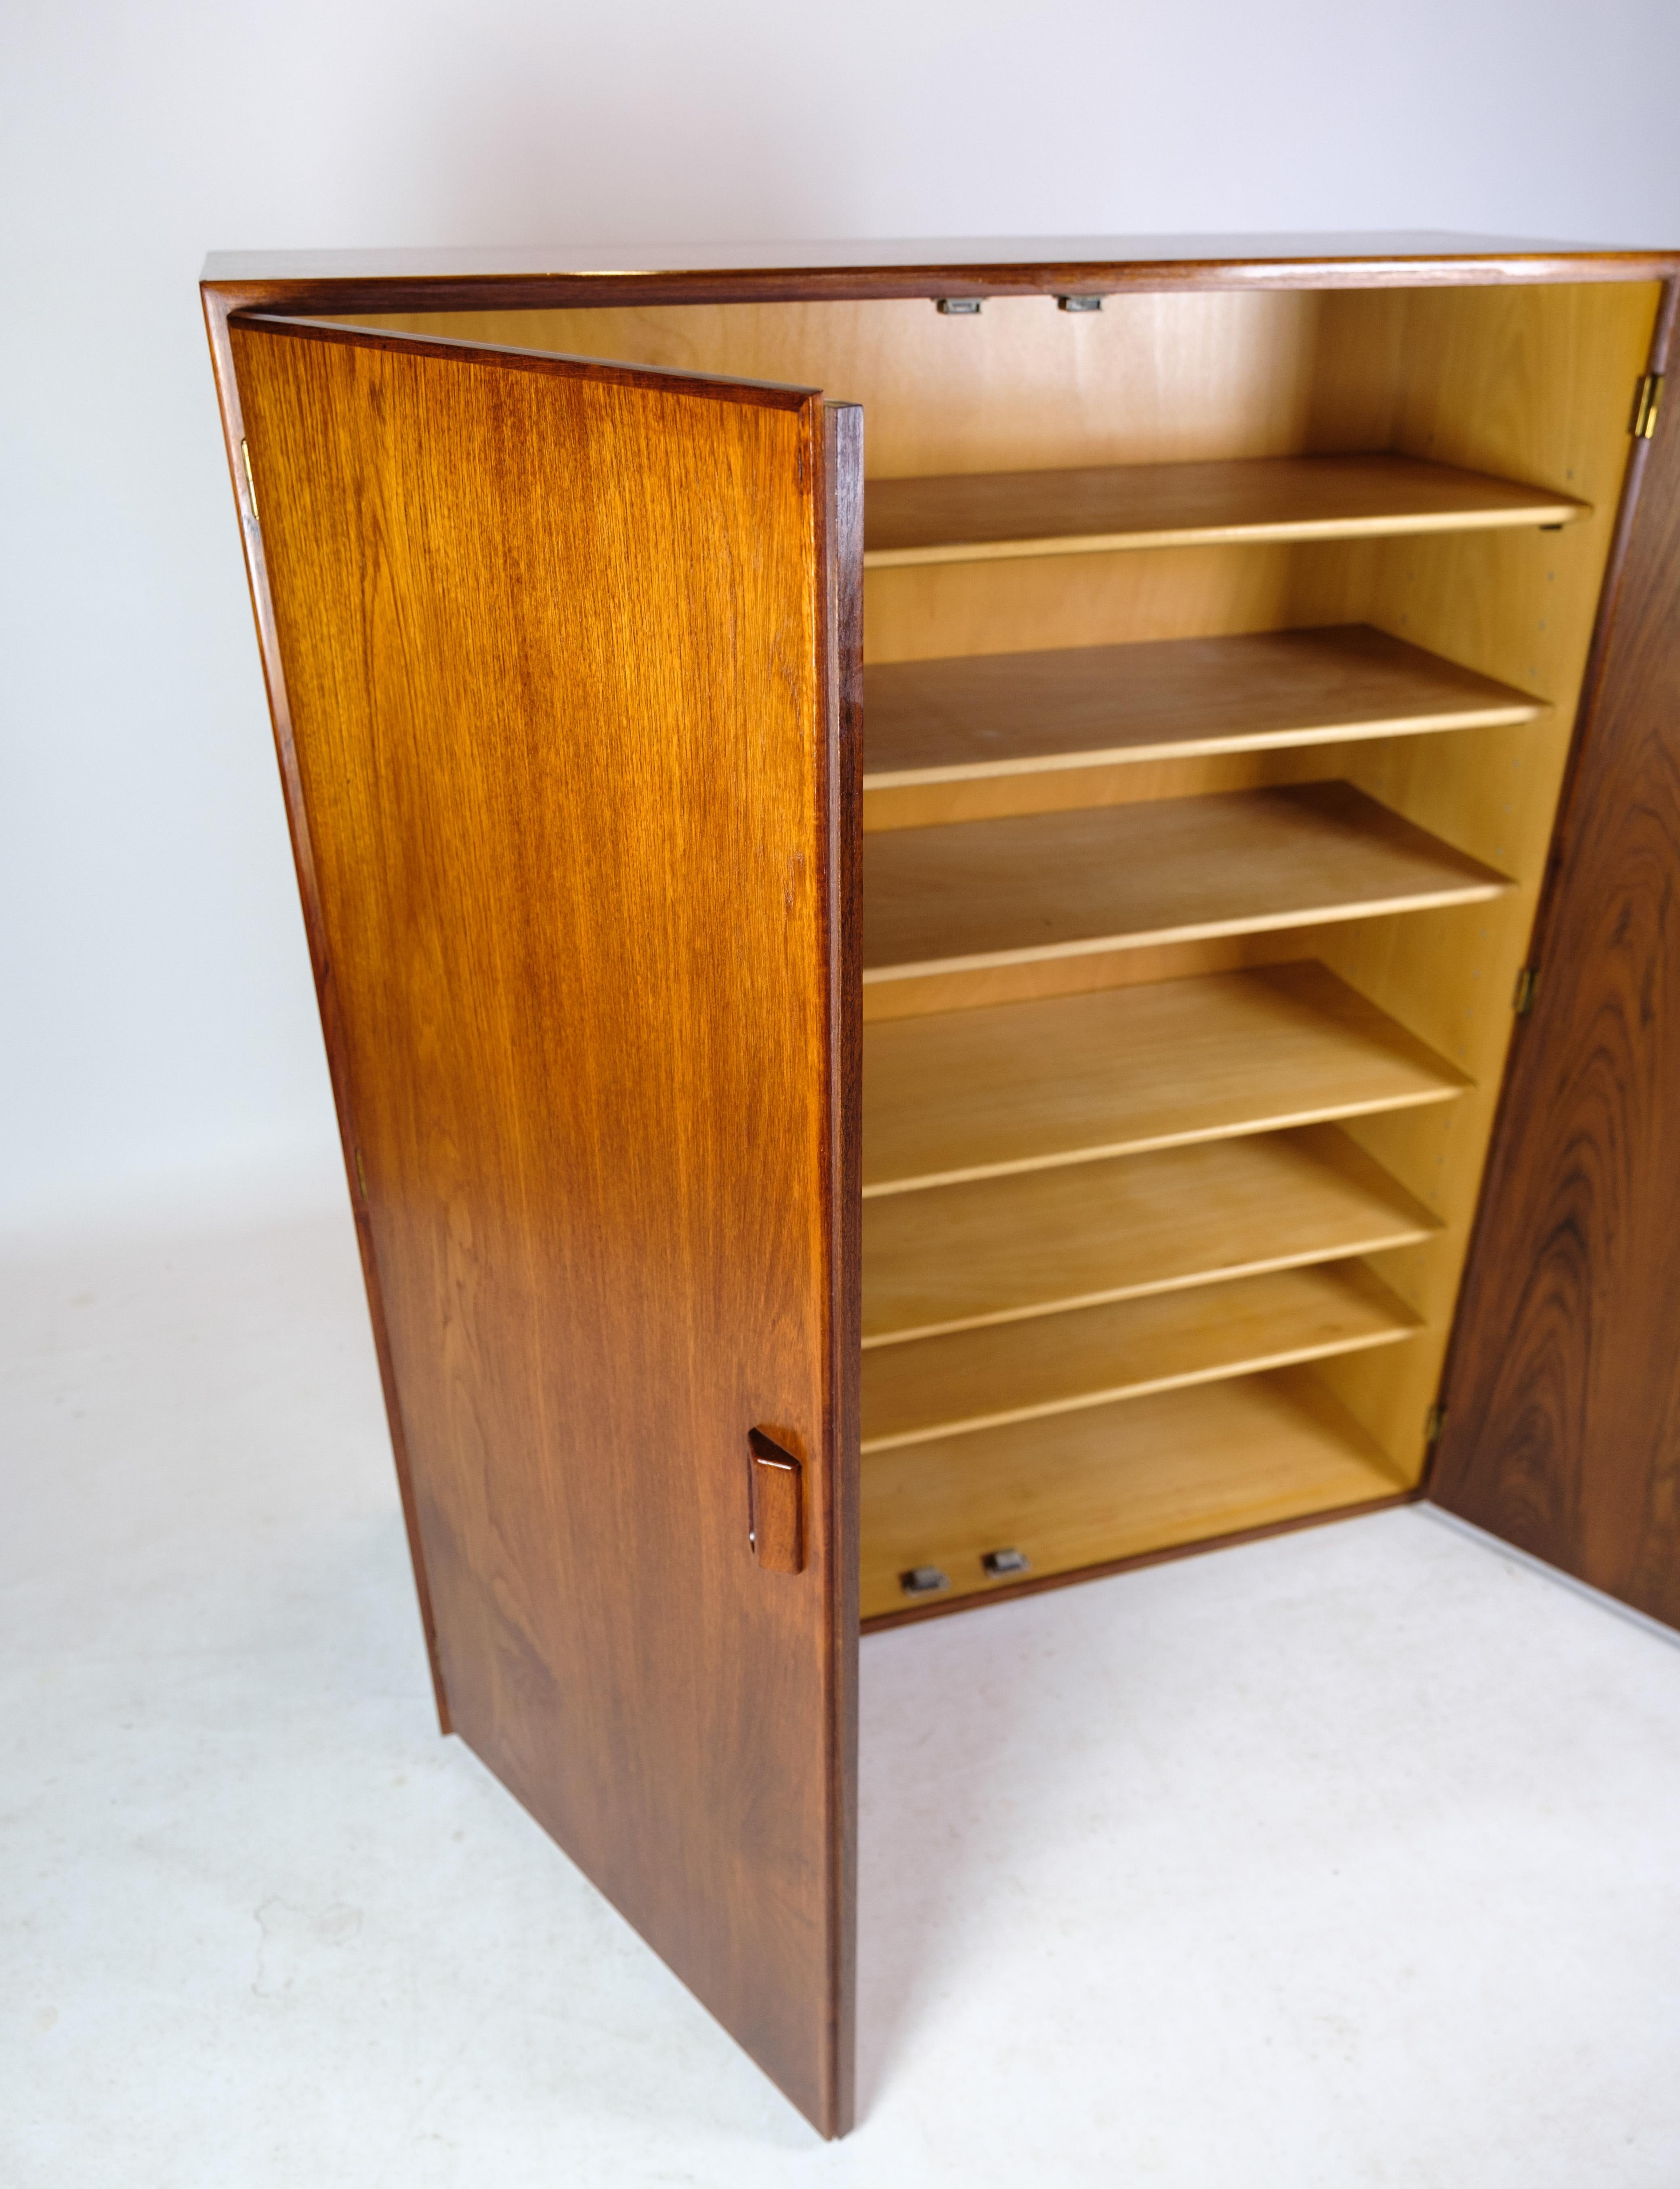 Børge Mogensen Hanging Cabinet In Teak Wood from the 1950s For Sale 1